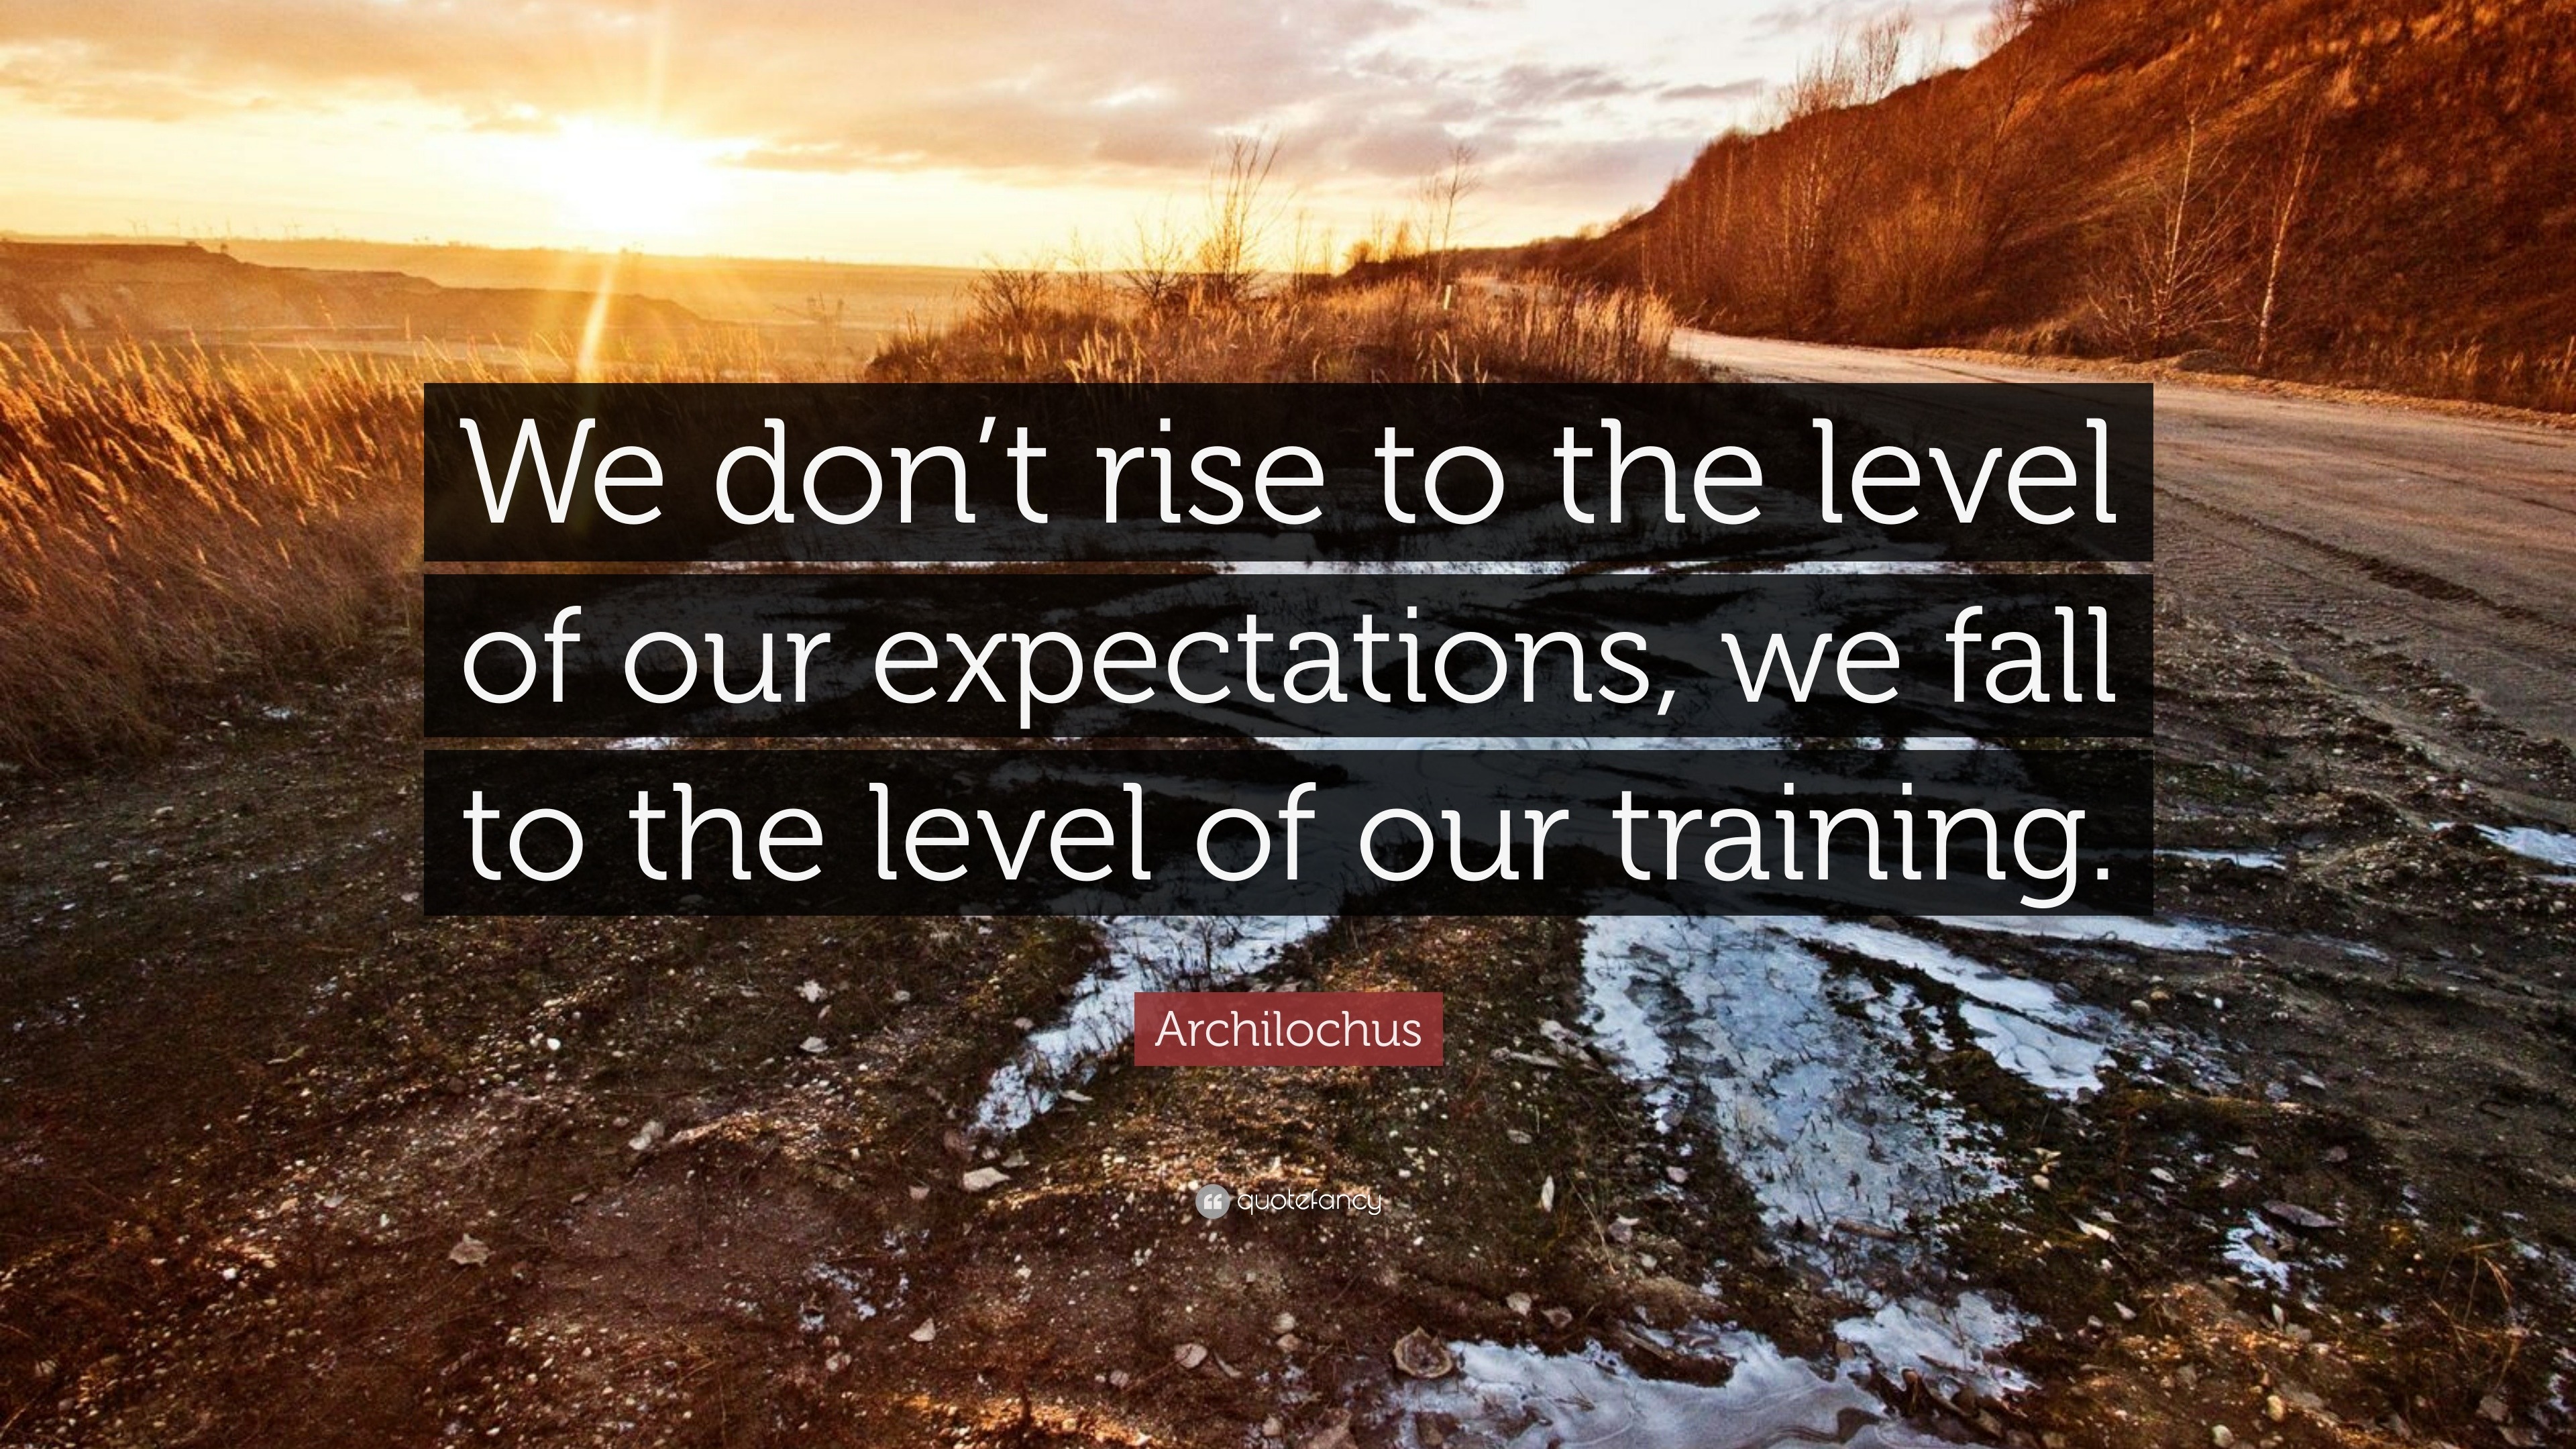 Archilochus Quote “We don t rise to the level of our expectations